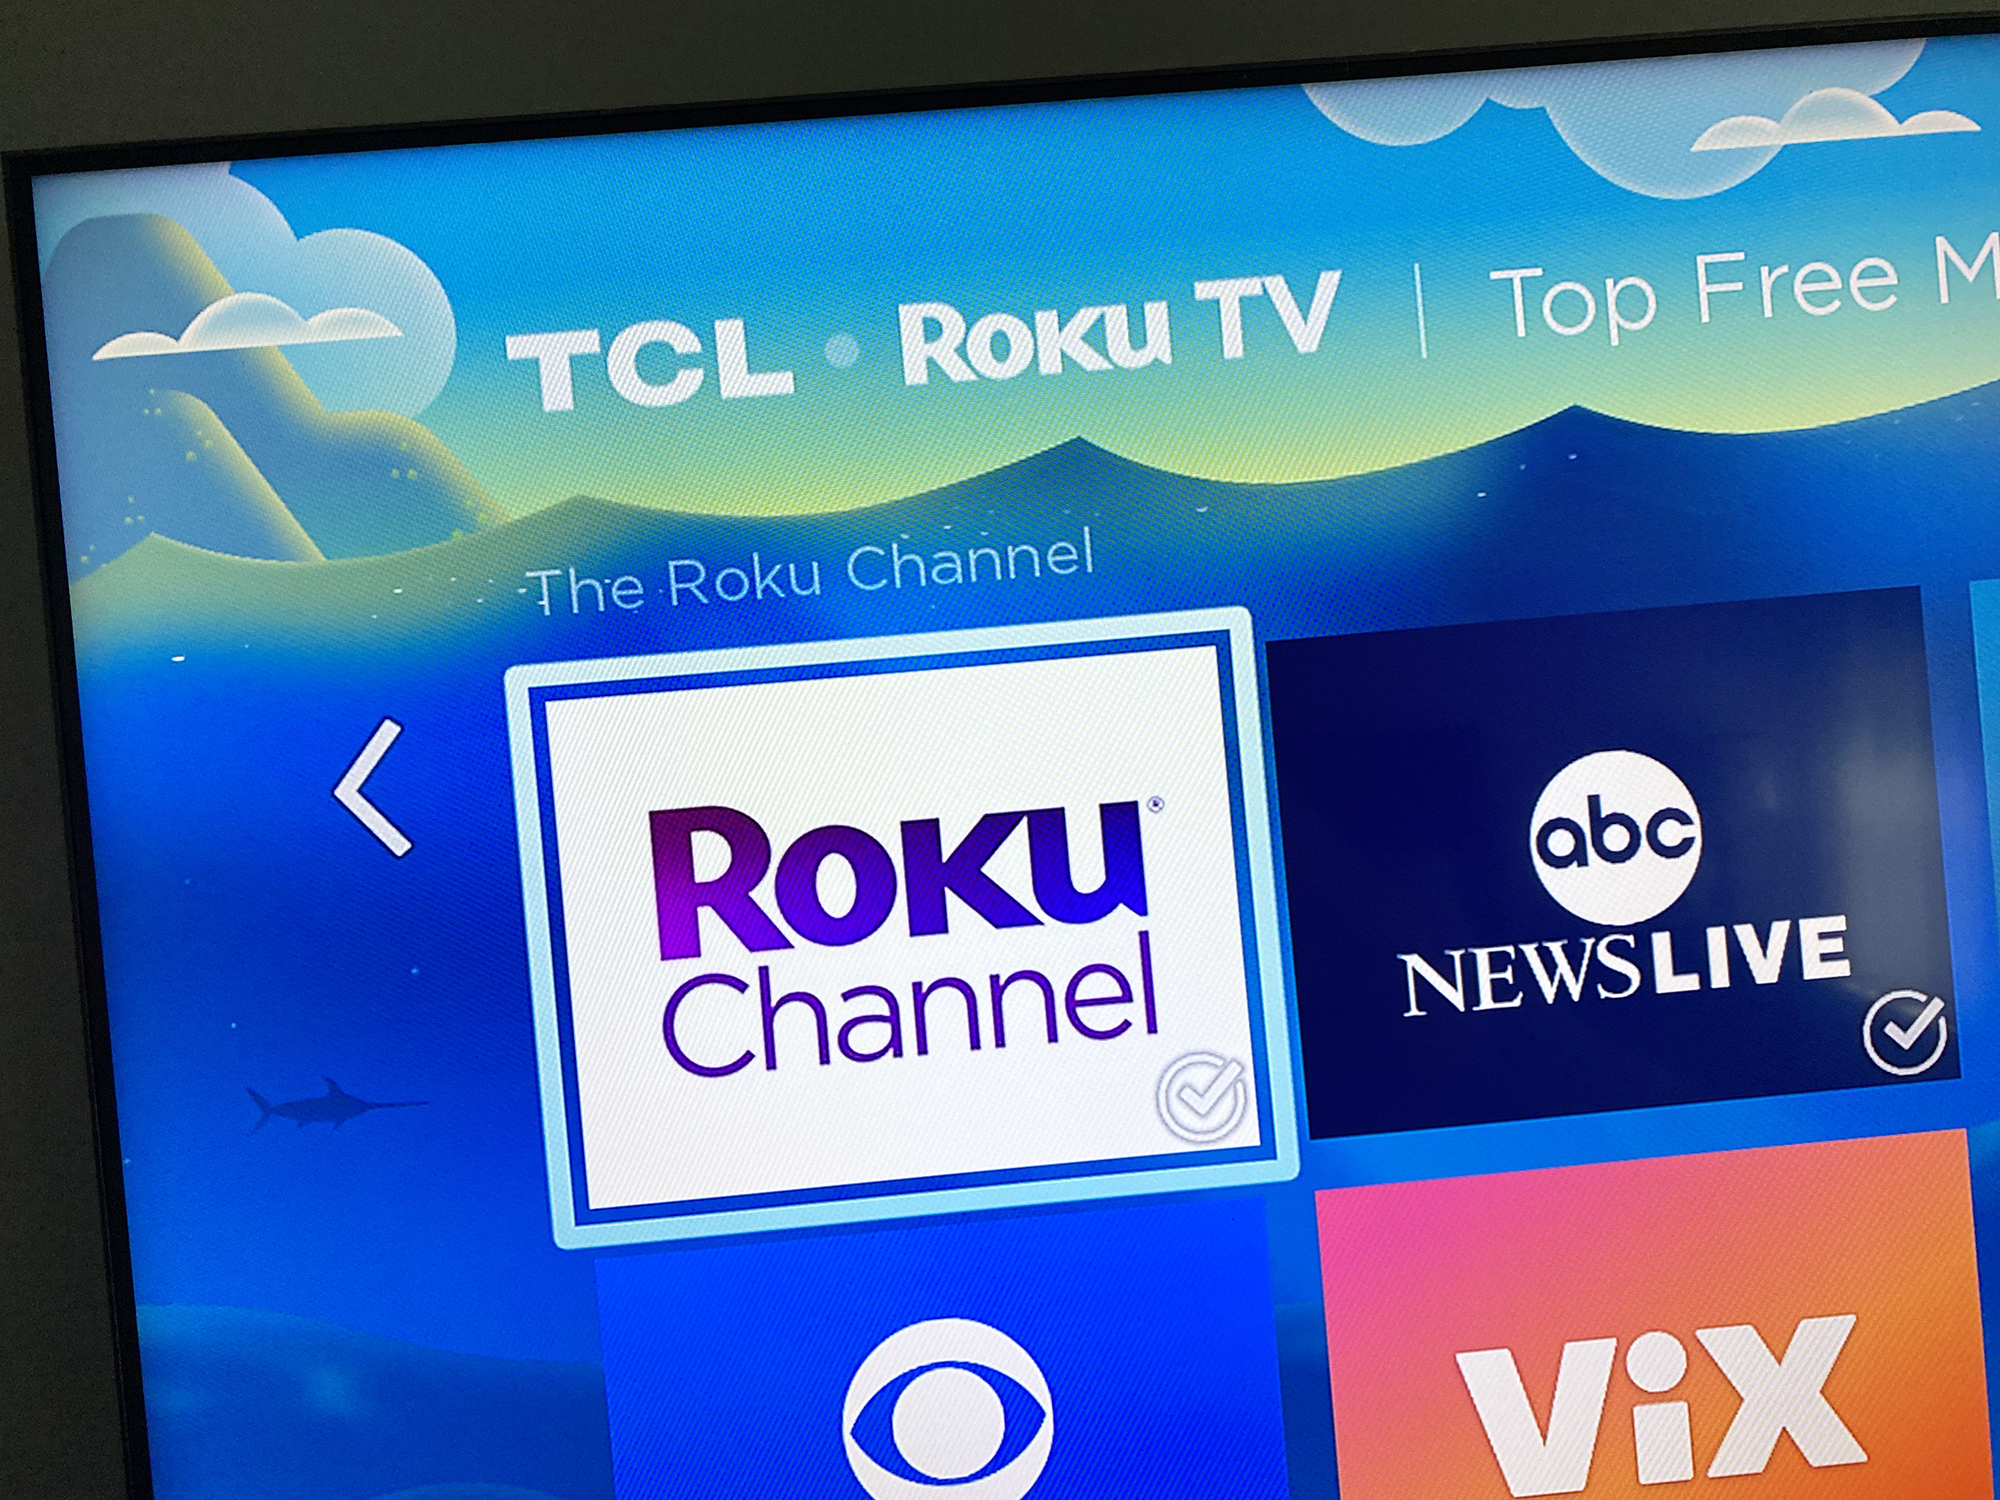 You'll soon be able to subscribe to Paramount+ from The Roku